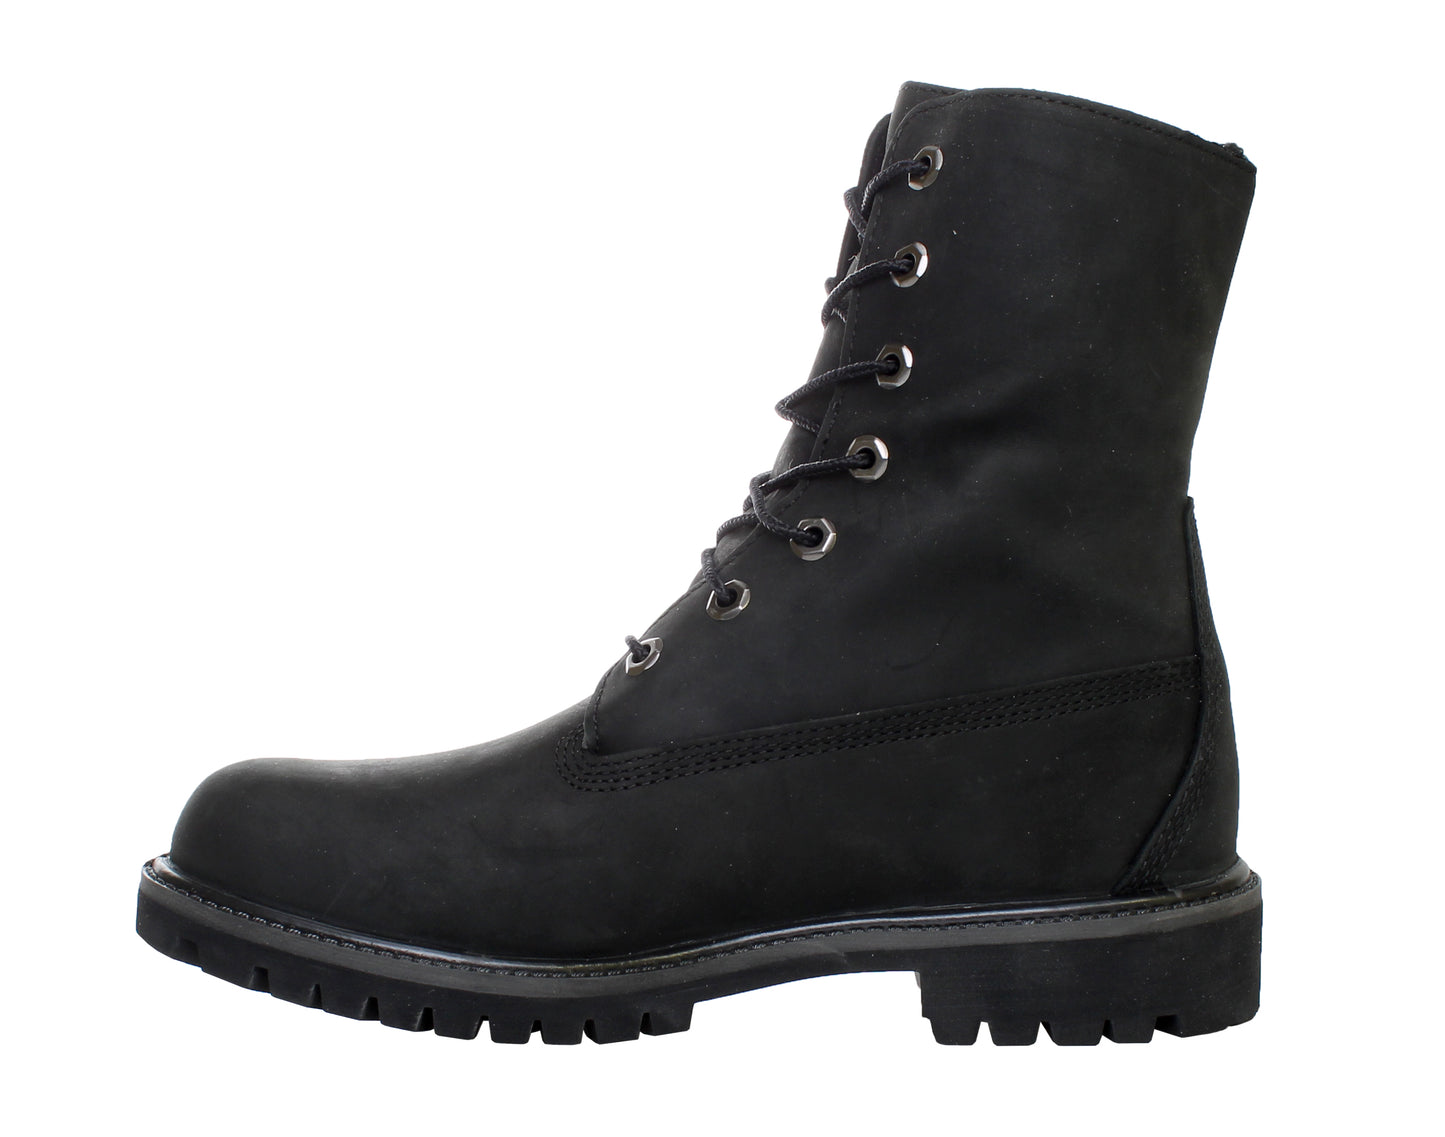 Timberland Roll-Top Warm Lined Waterproof Fold-Down Men's Boots